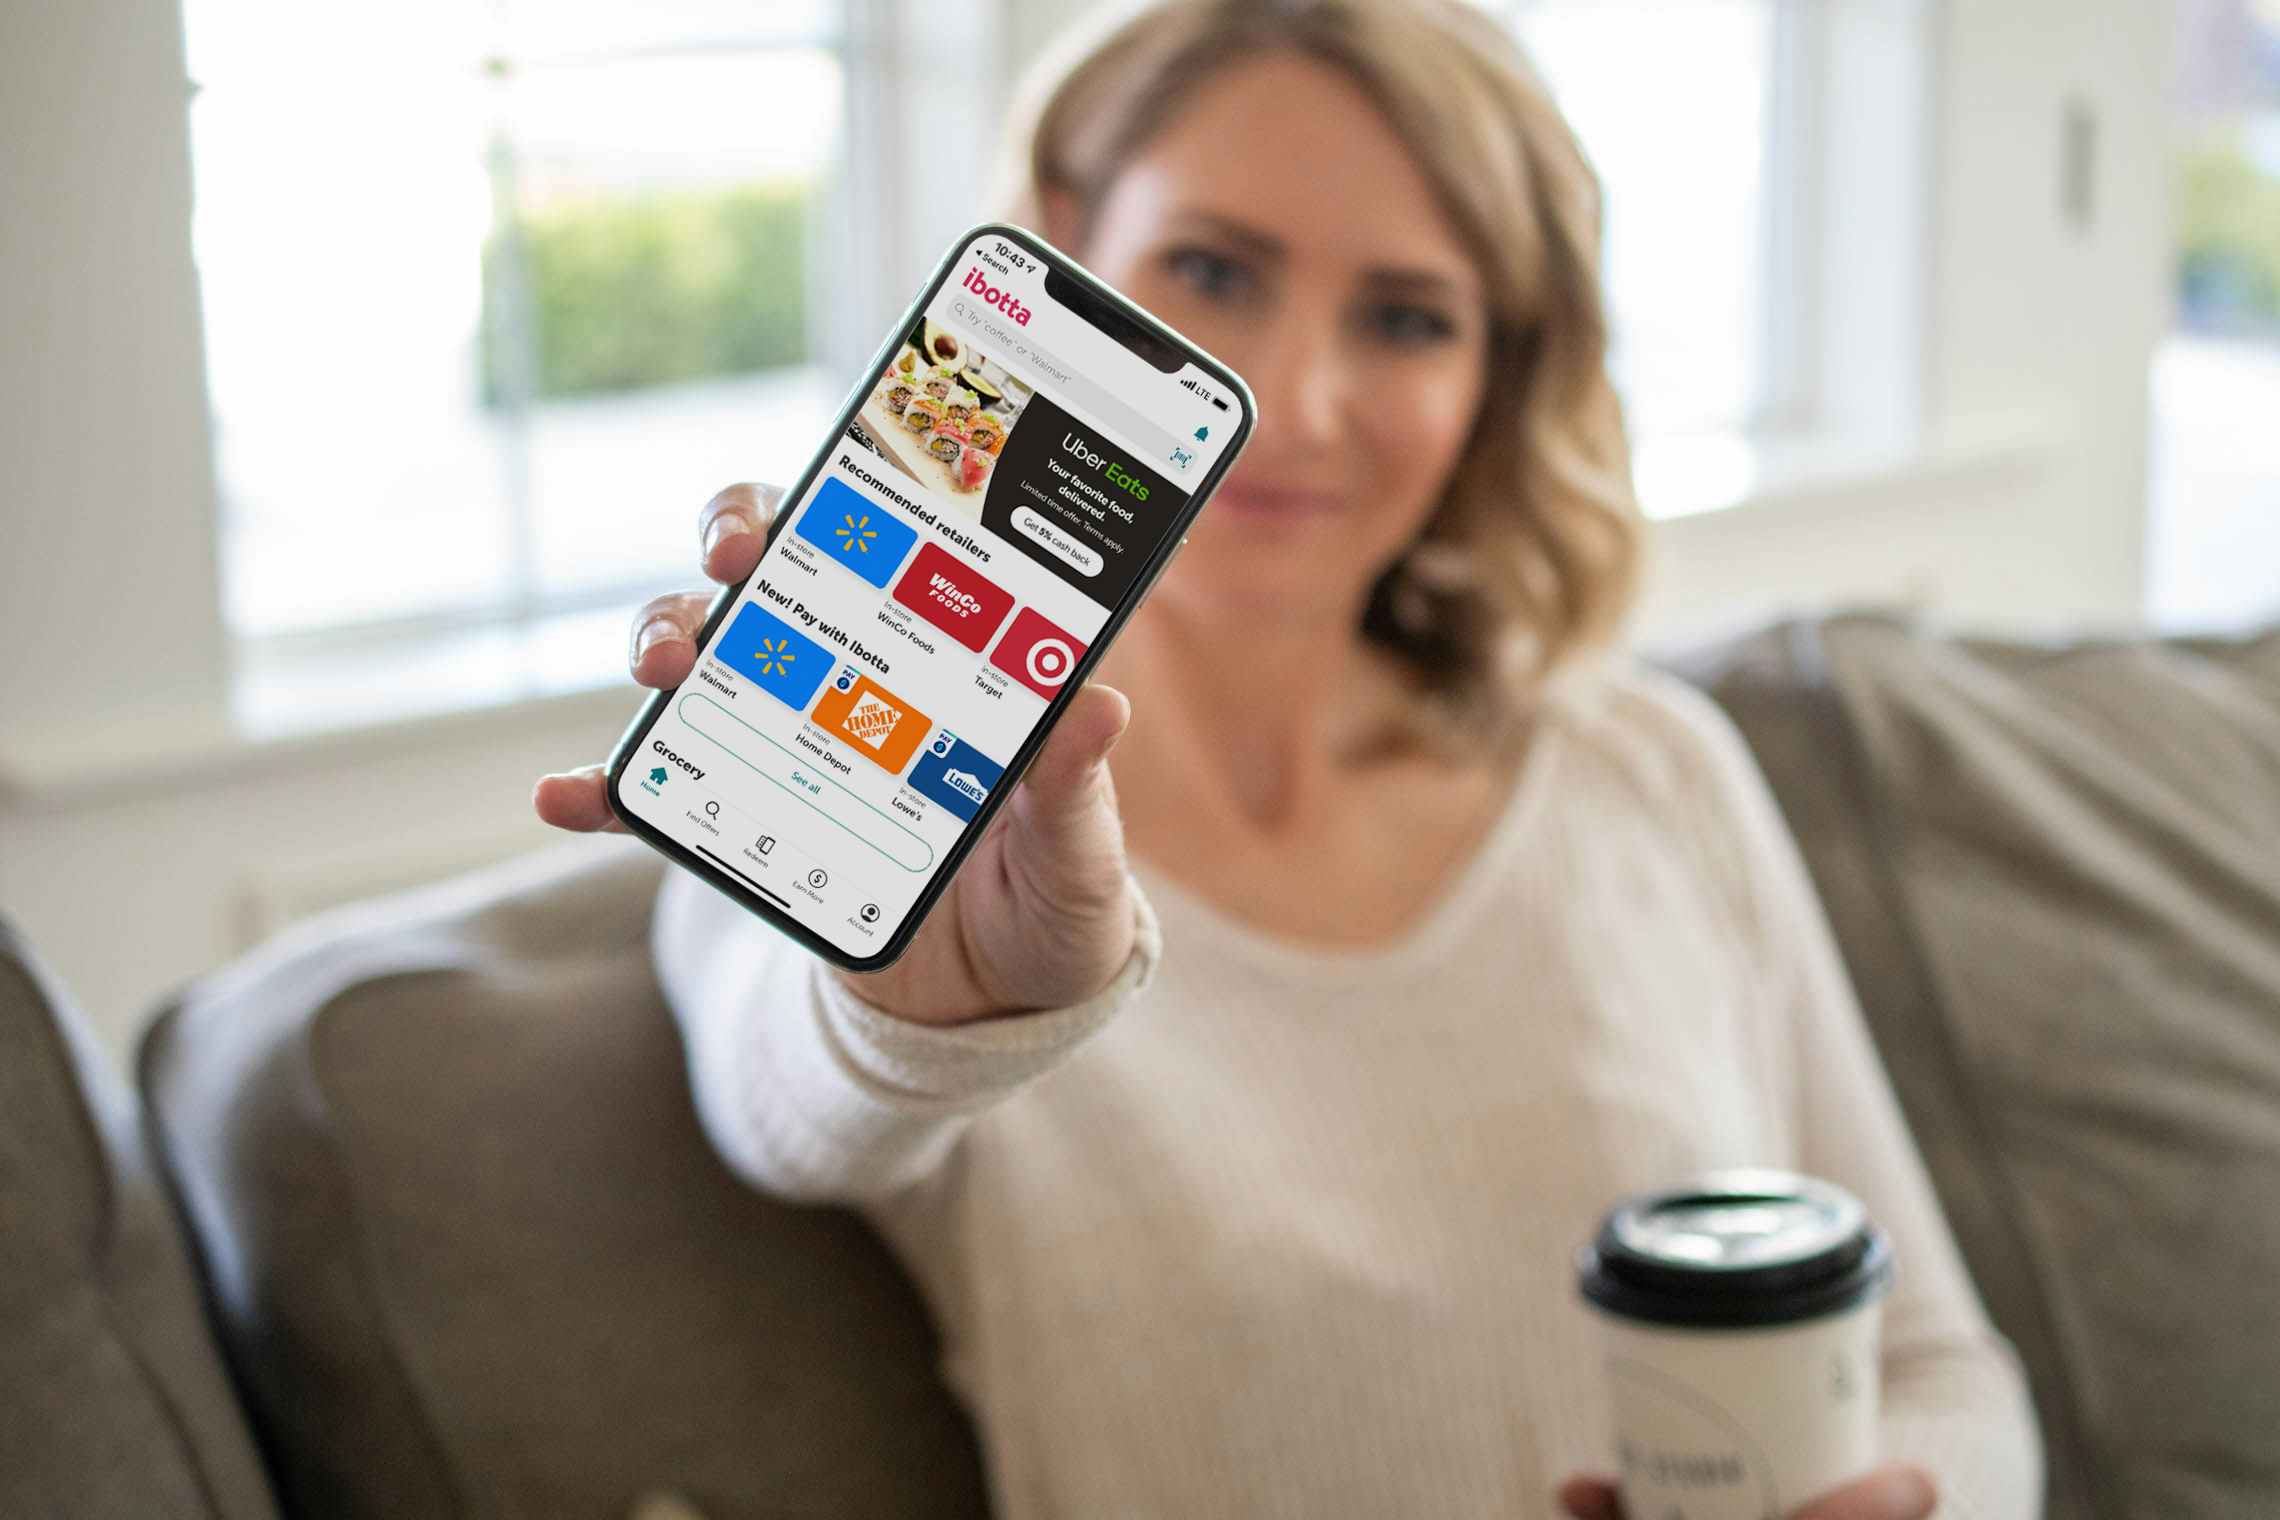 A woman holding a phone out in front of her, facing the camera, with the ibotta app open on it.